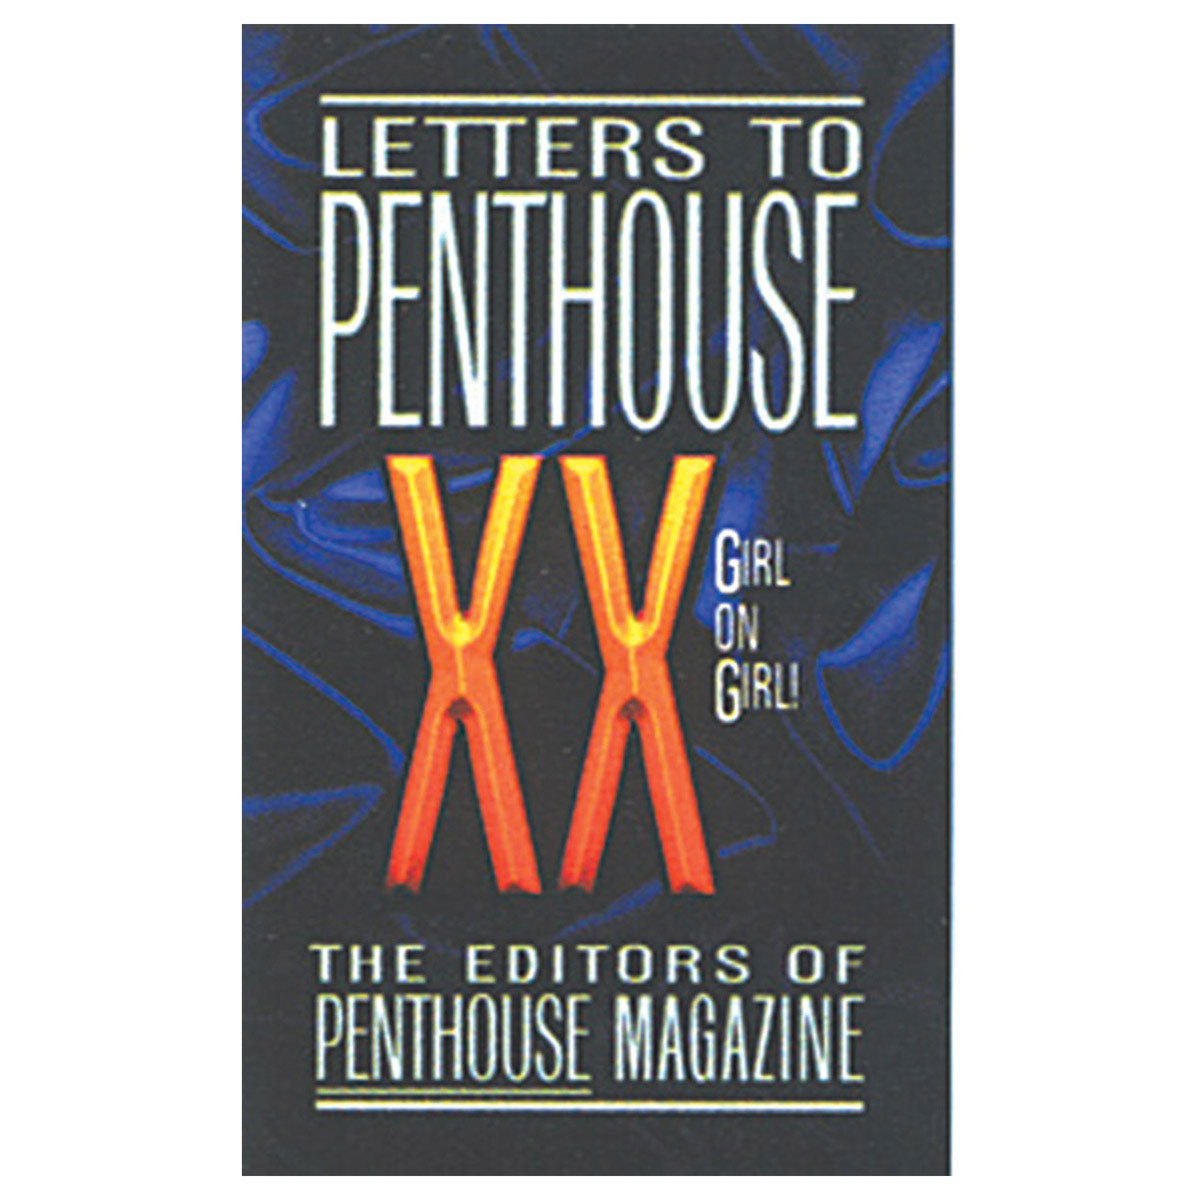 Letters to Penthouse XX - Girl on Girl! - Grand Central Publishing